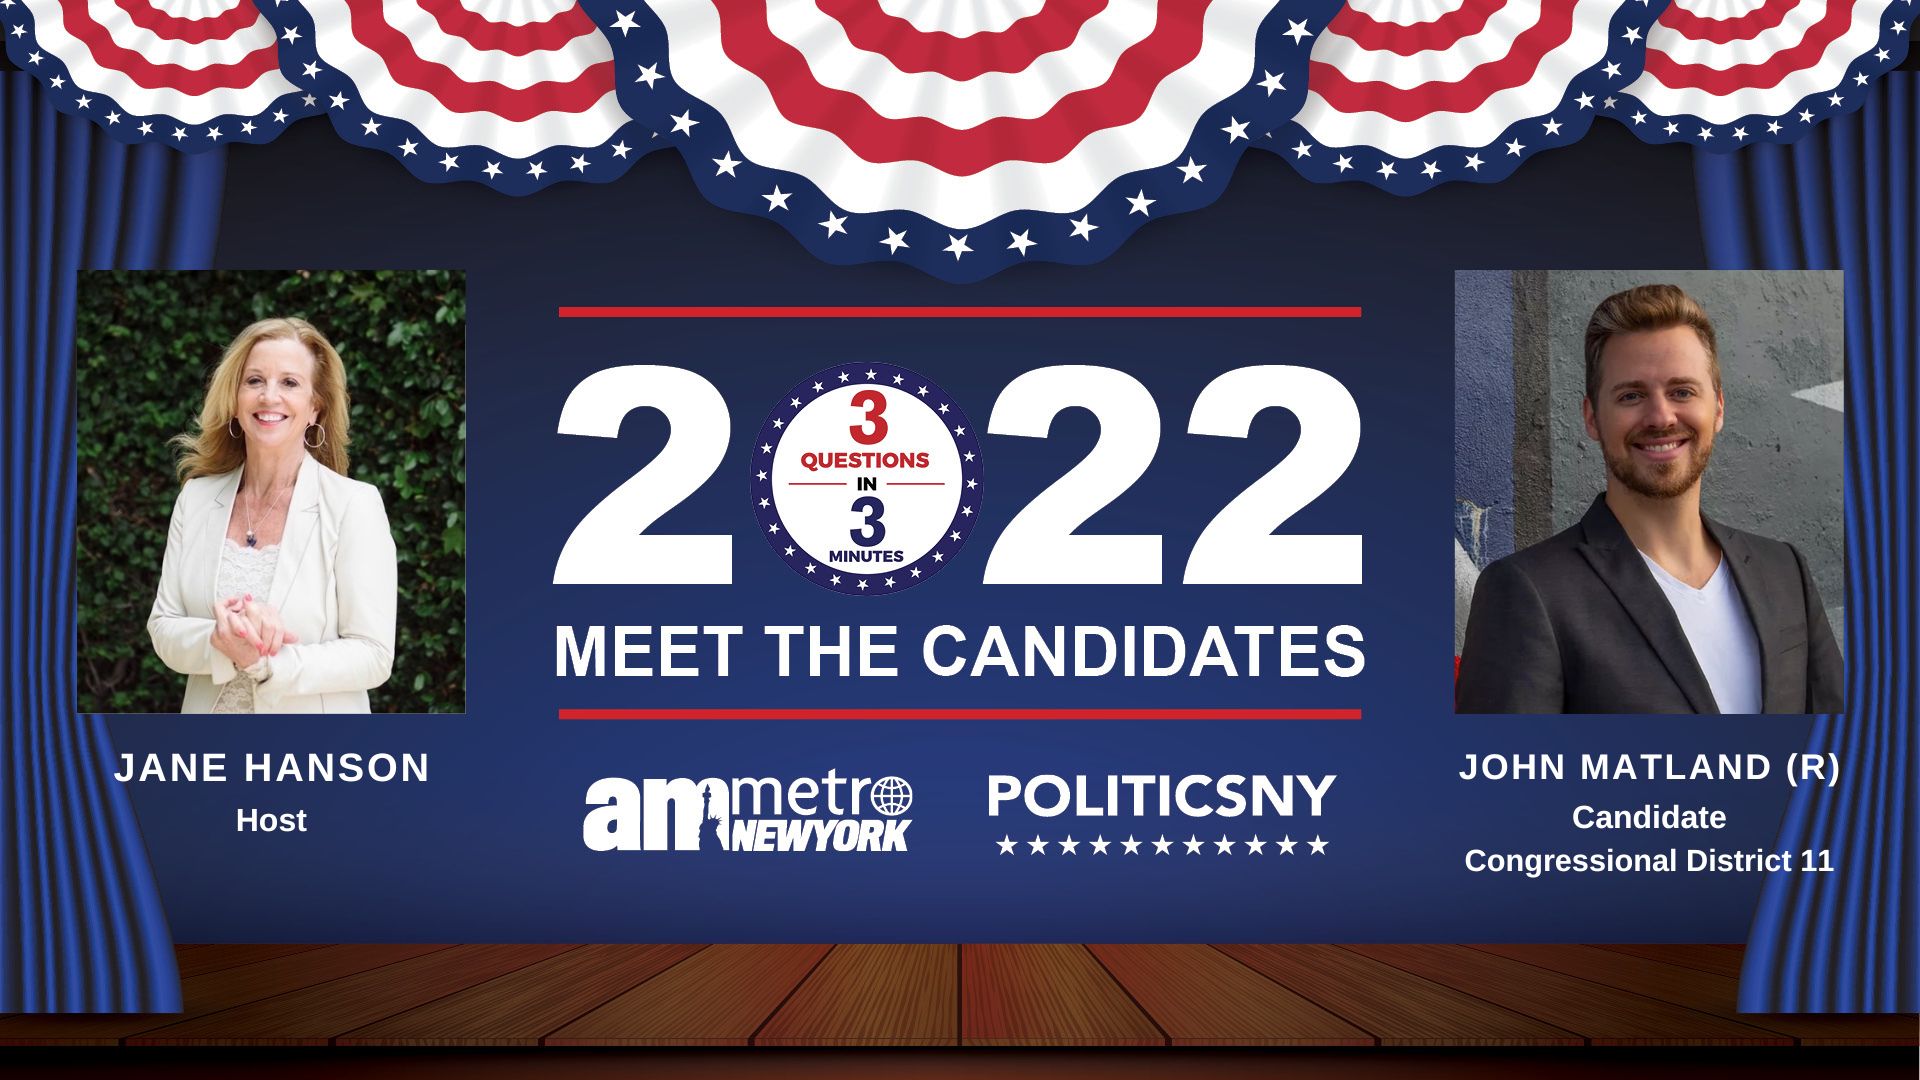 2022 Meet the Candidates John Matland for Congressional District 11